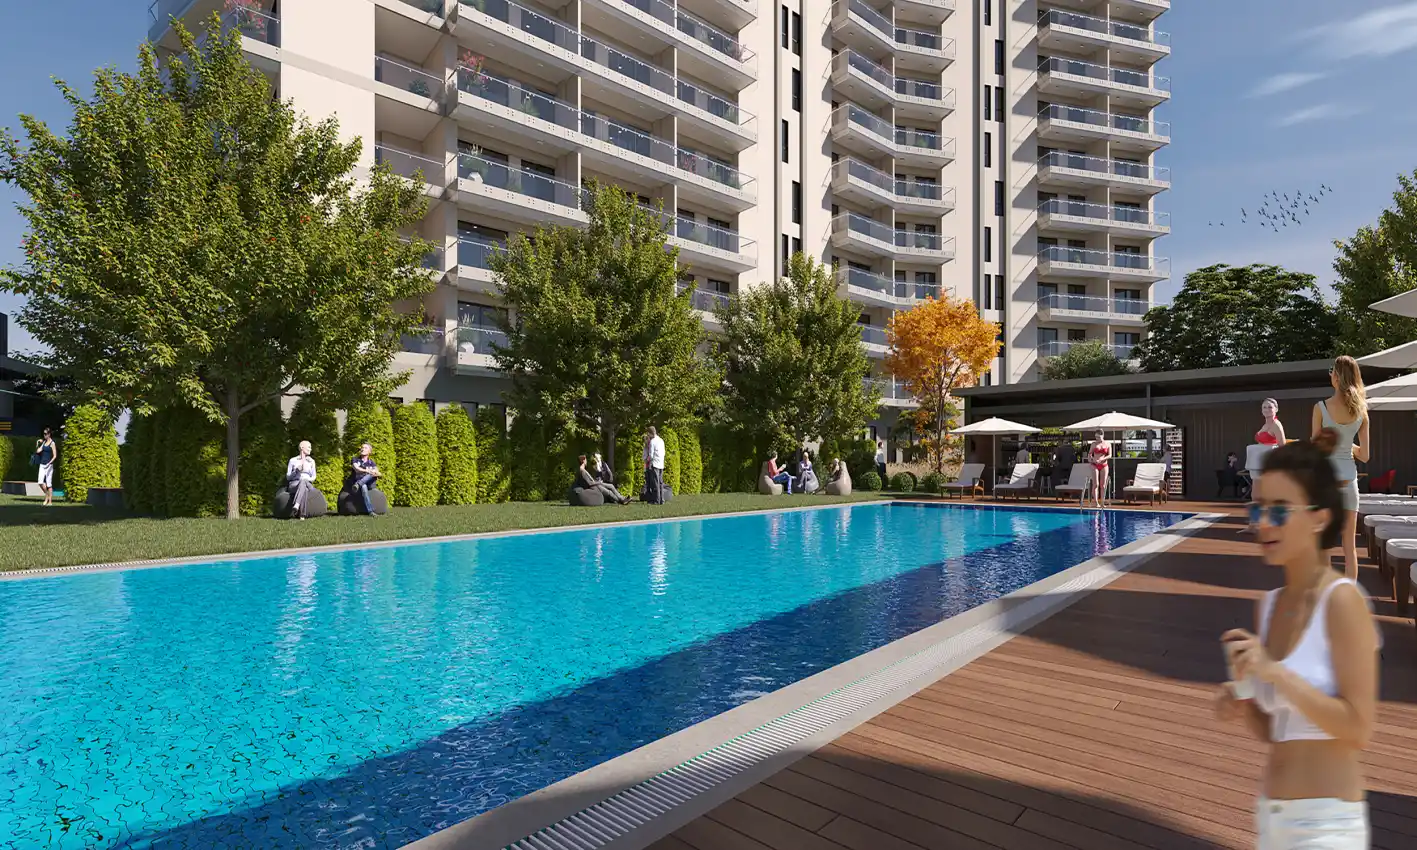 housebind The project with magnificent views of Istanbul opens a window to the coast of Maltepe